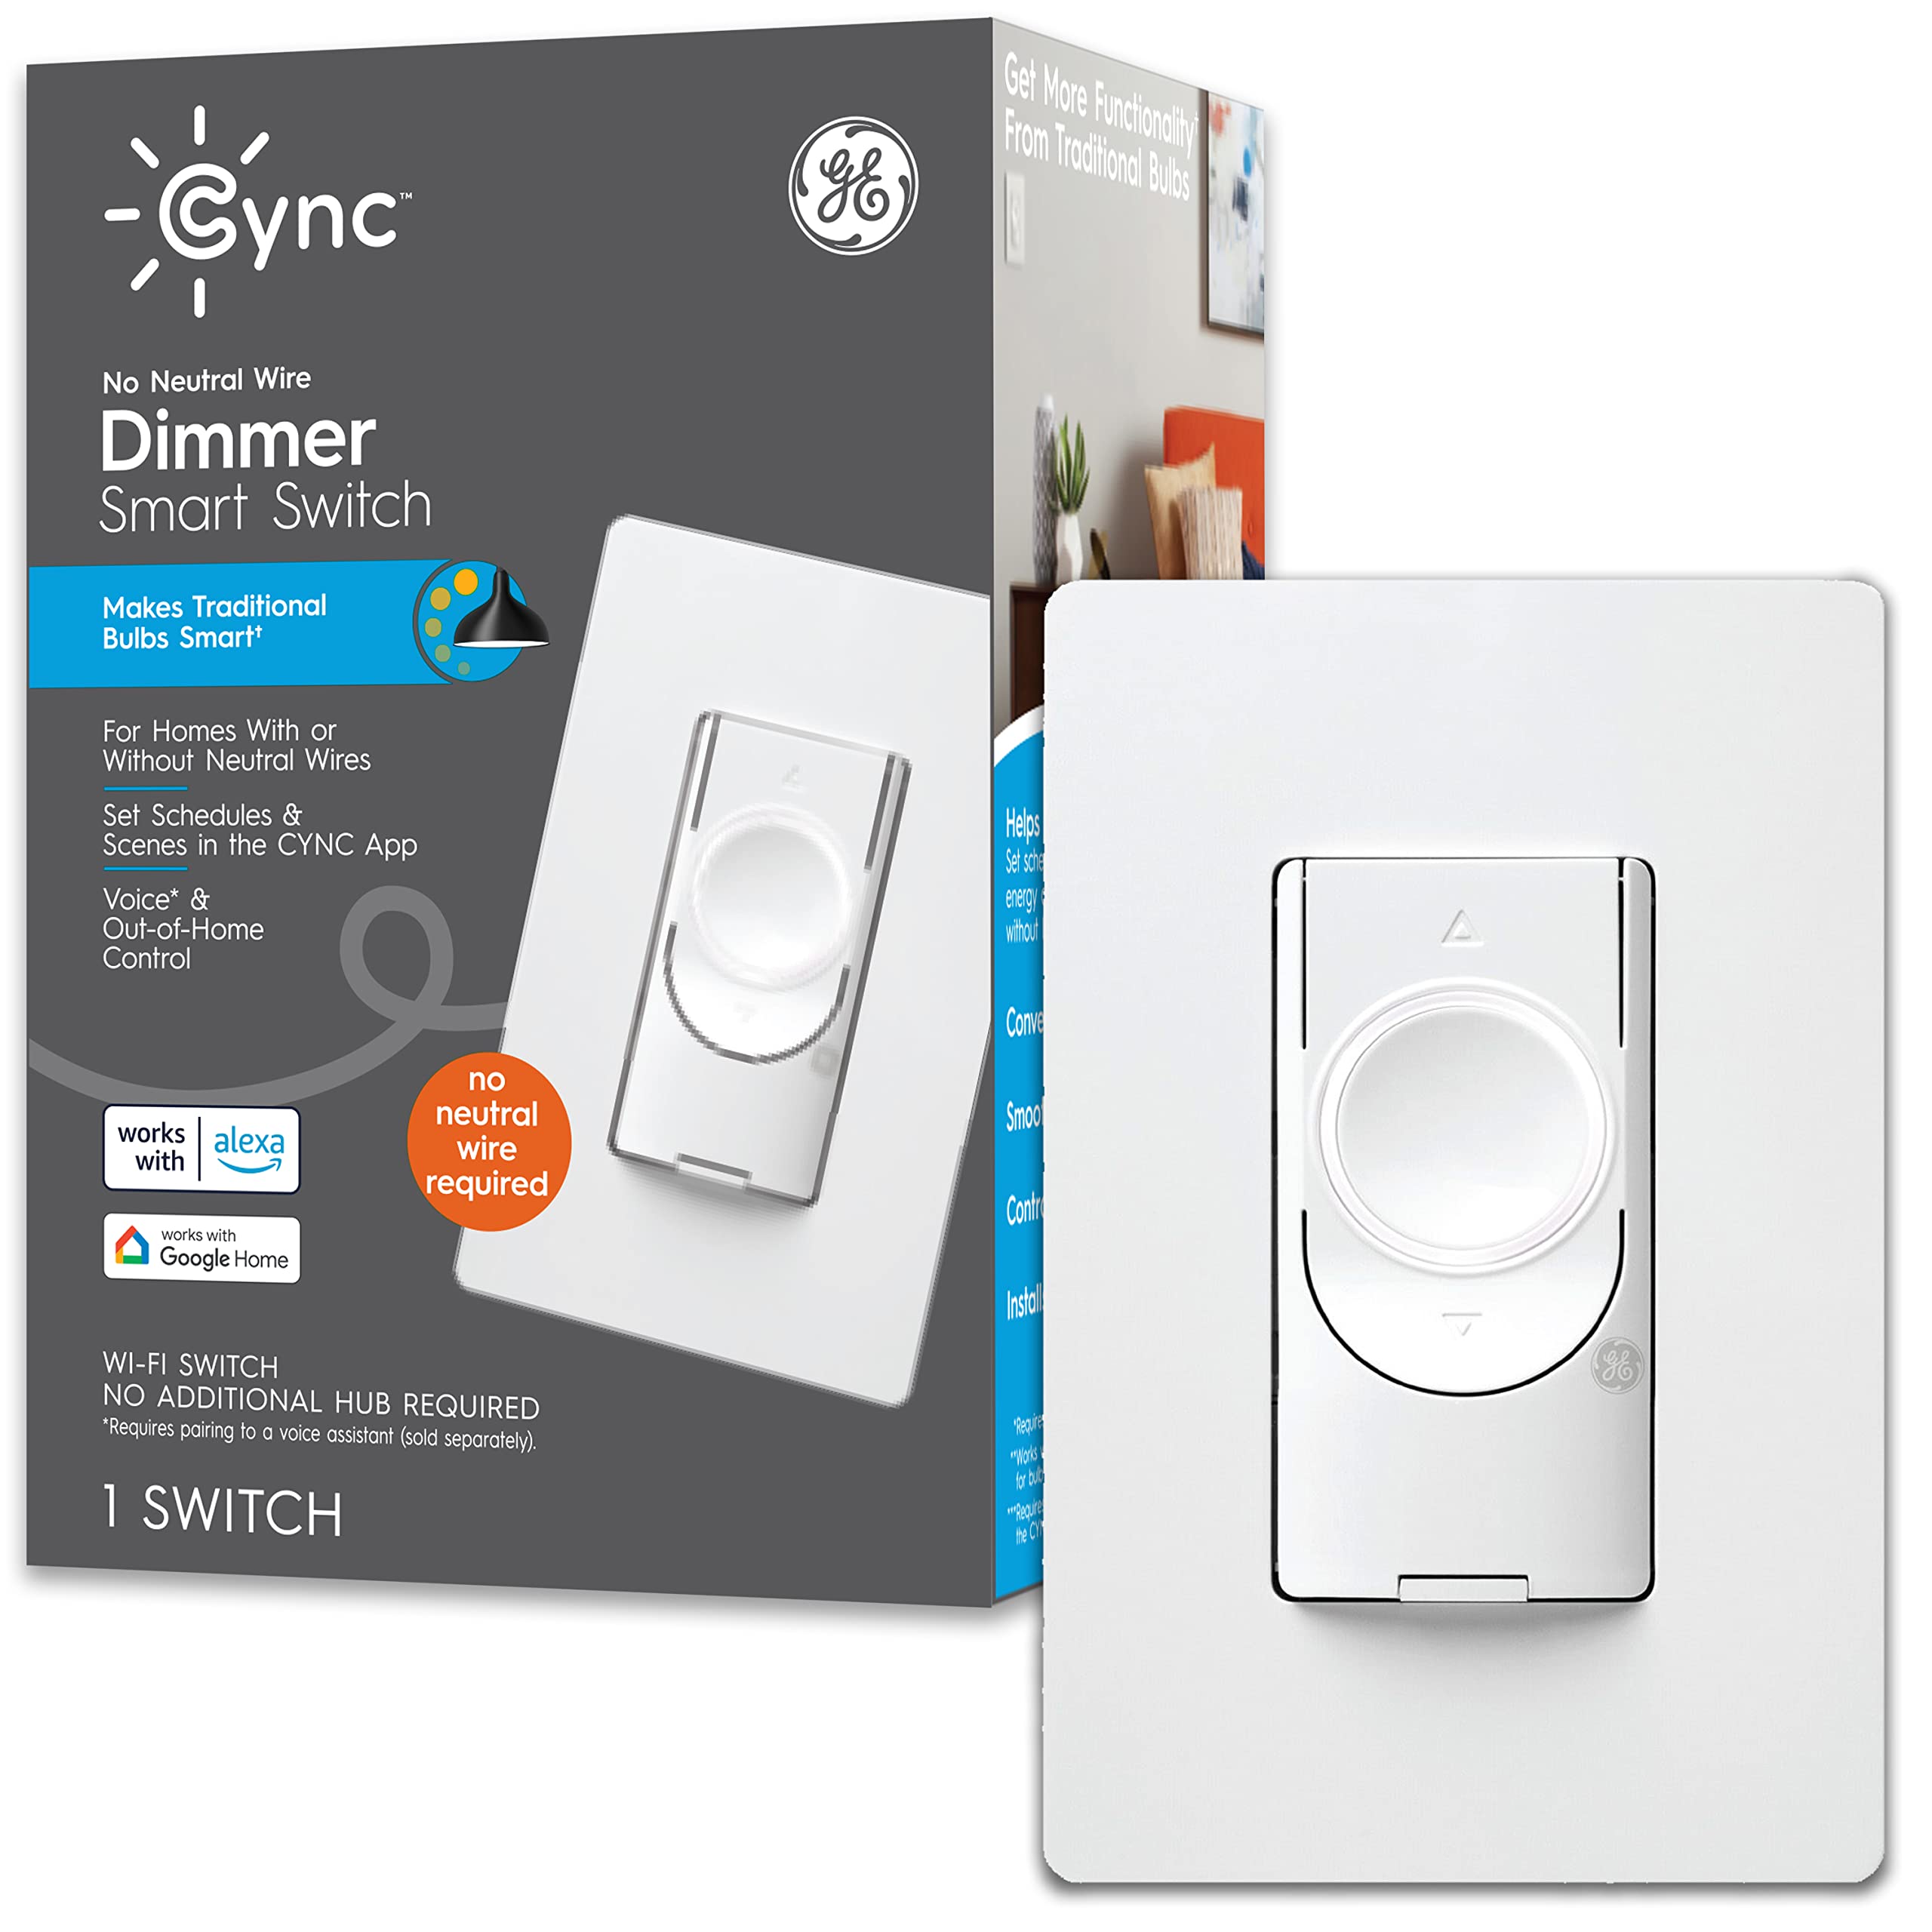 GE Lighting CYNC Smart Dimmer Light Switch, No Neutral Wire Required, Bluetooth and 2.4 GHz Wi-Fi 3-Wire Switch, Works with Alexa and Google Home, White